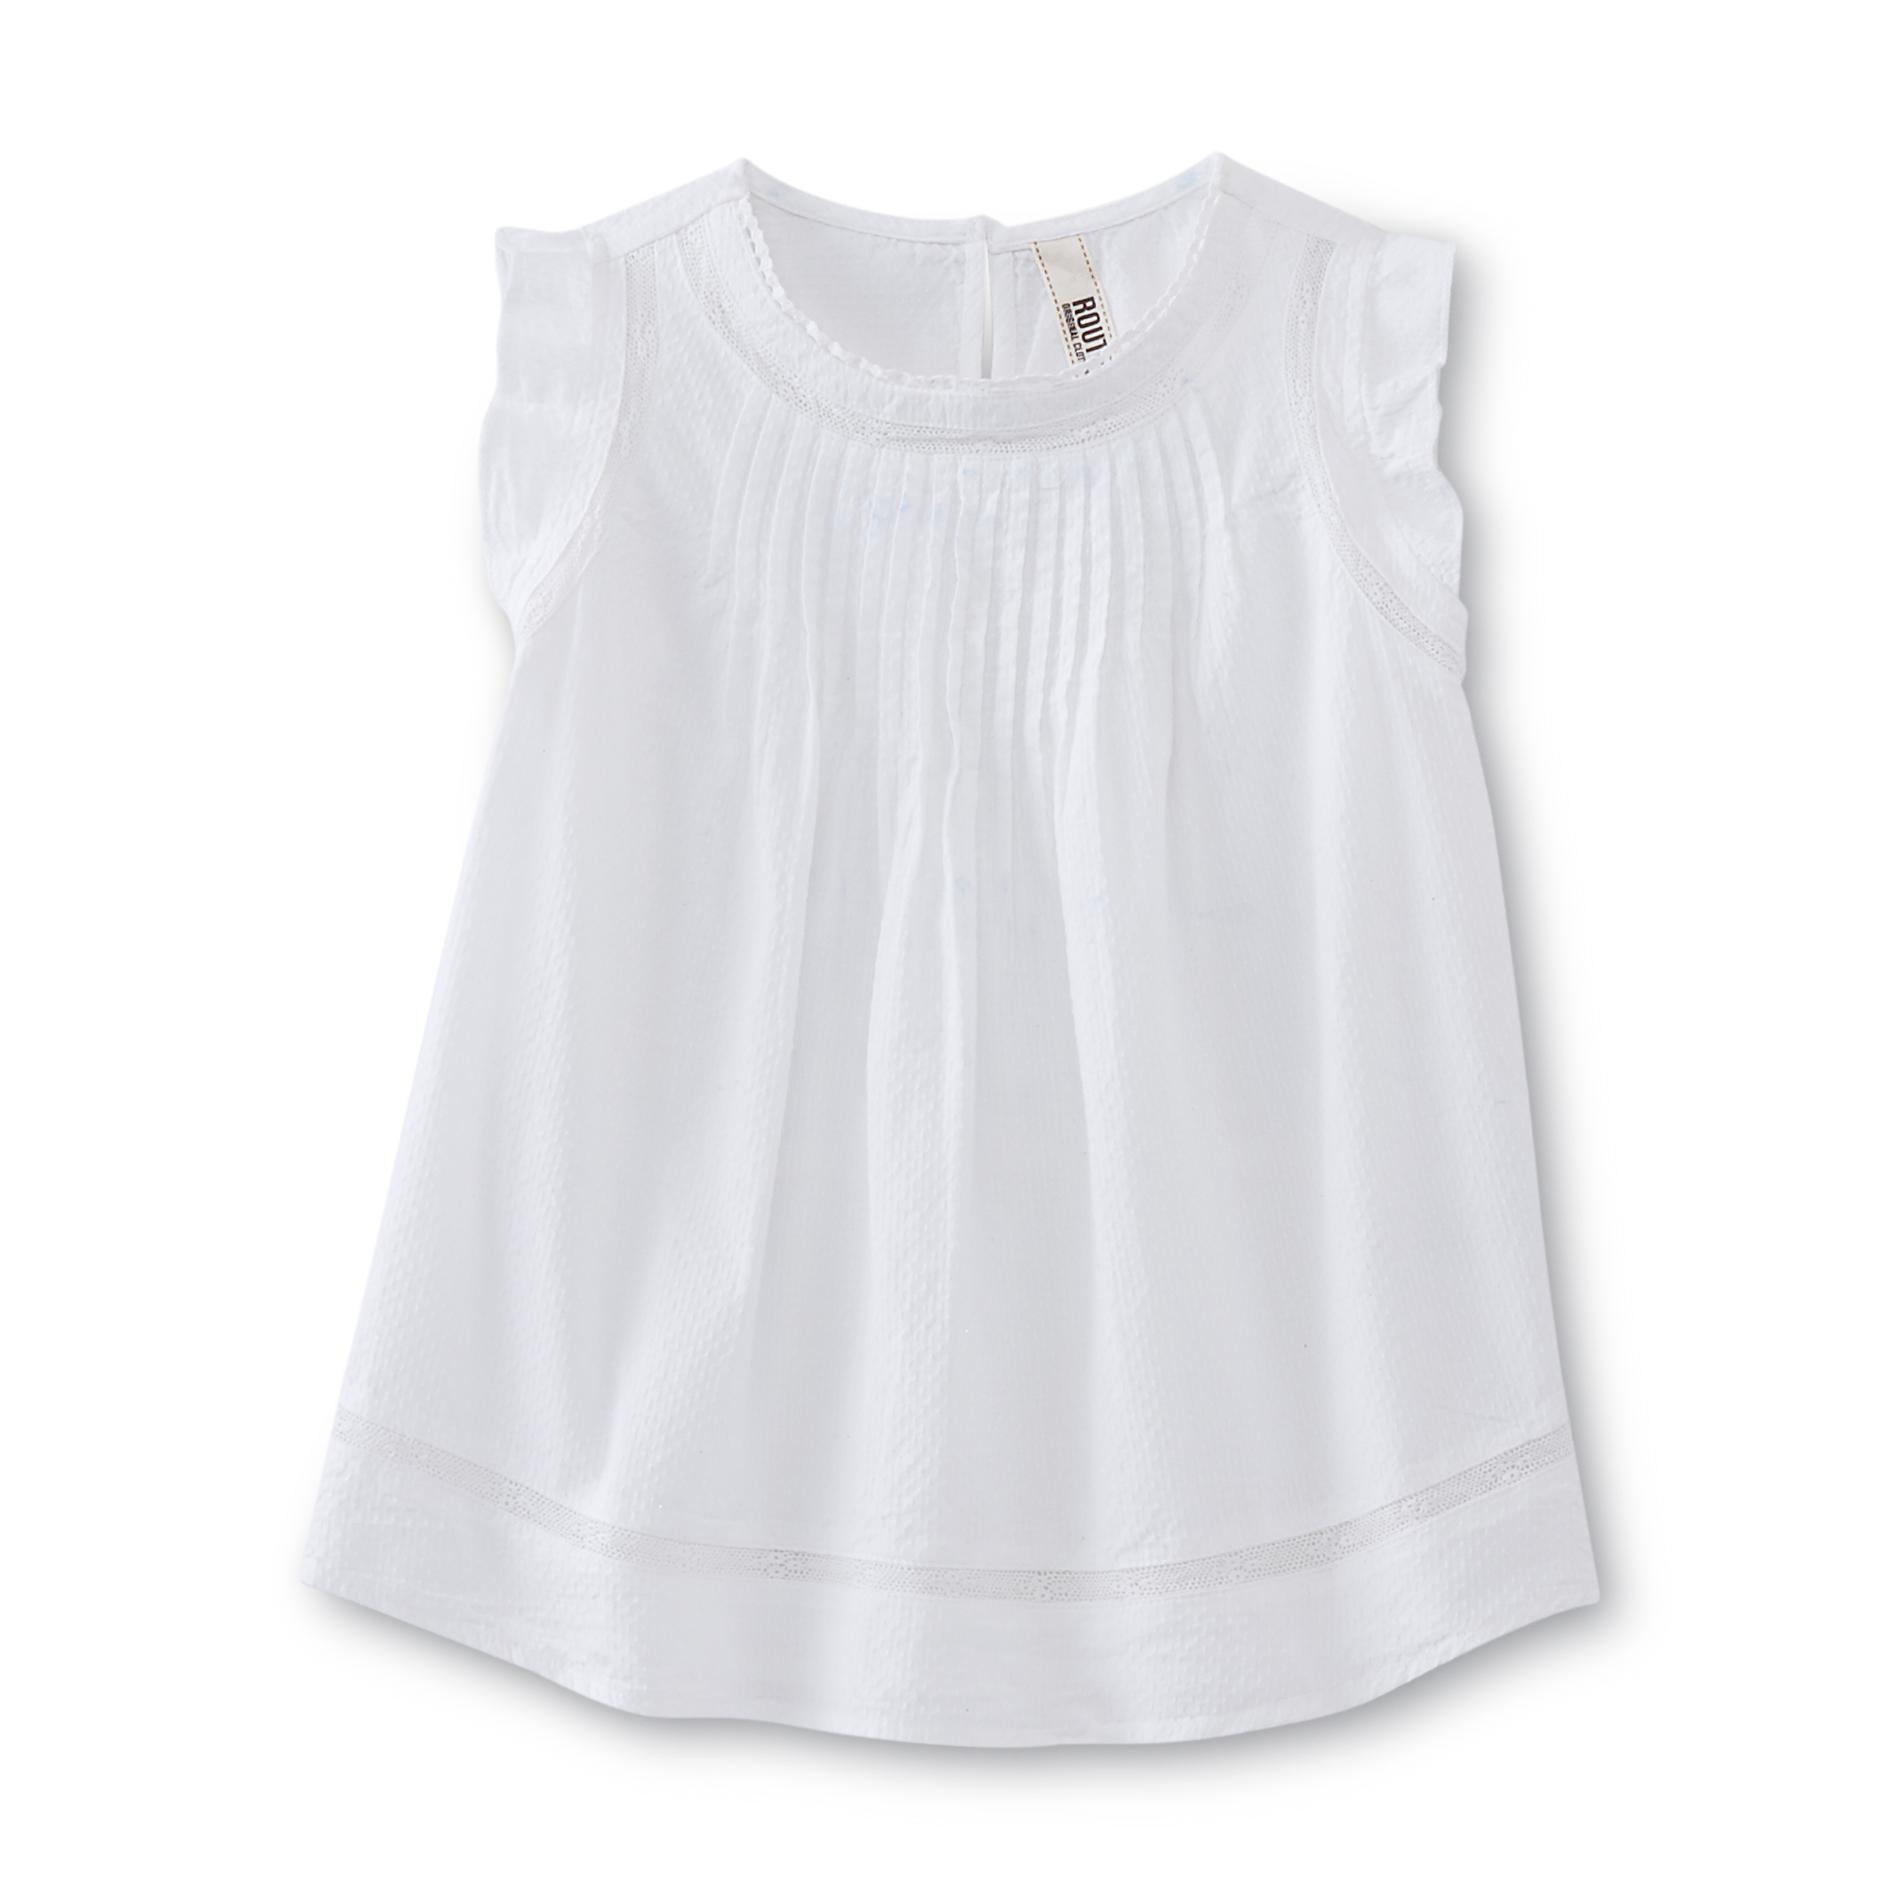 Route 66 Girl's Peasant Top